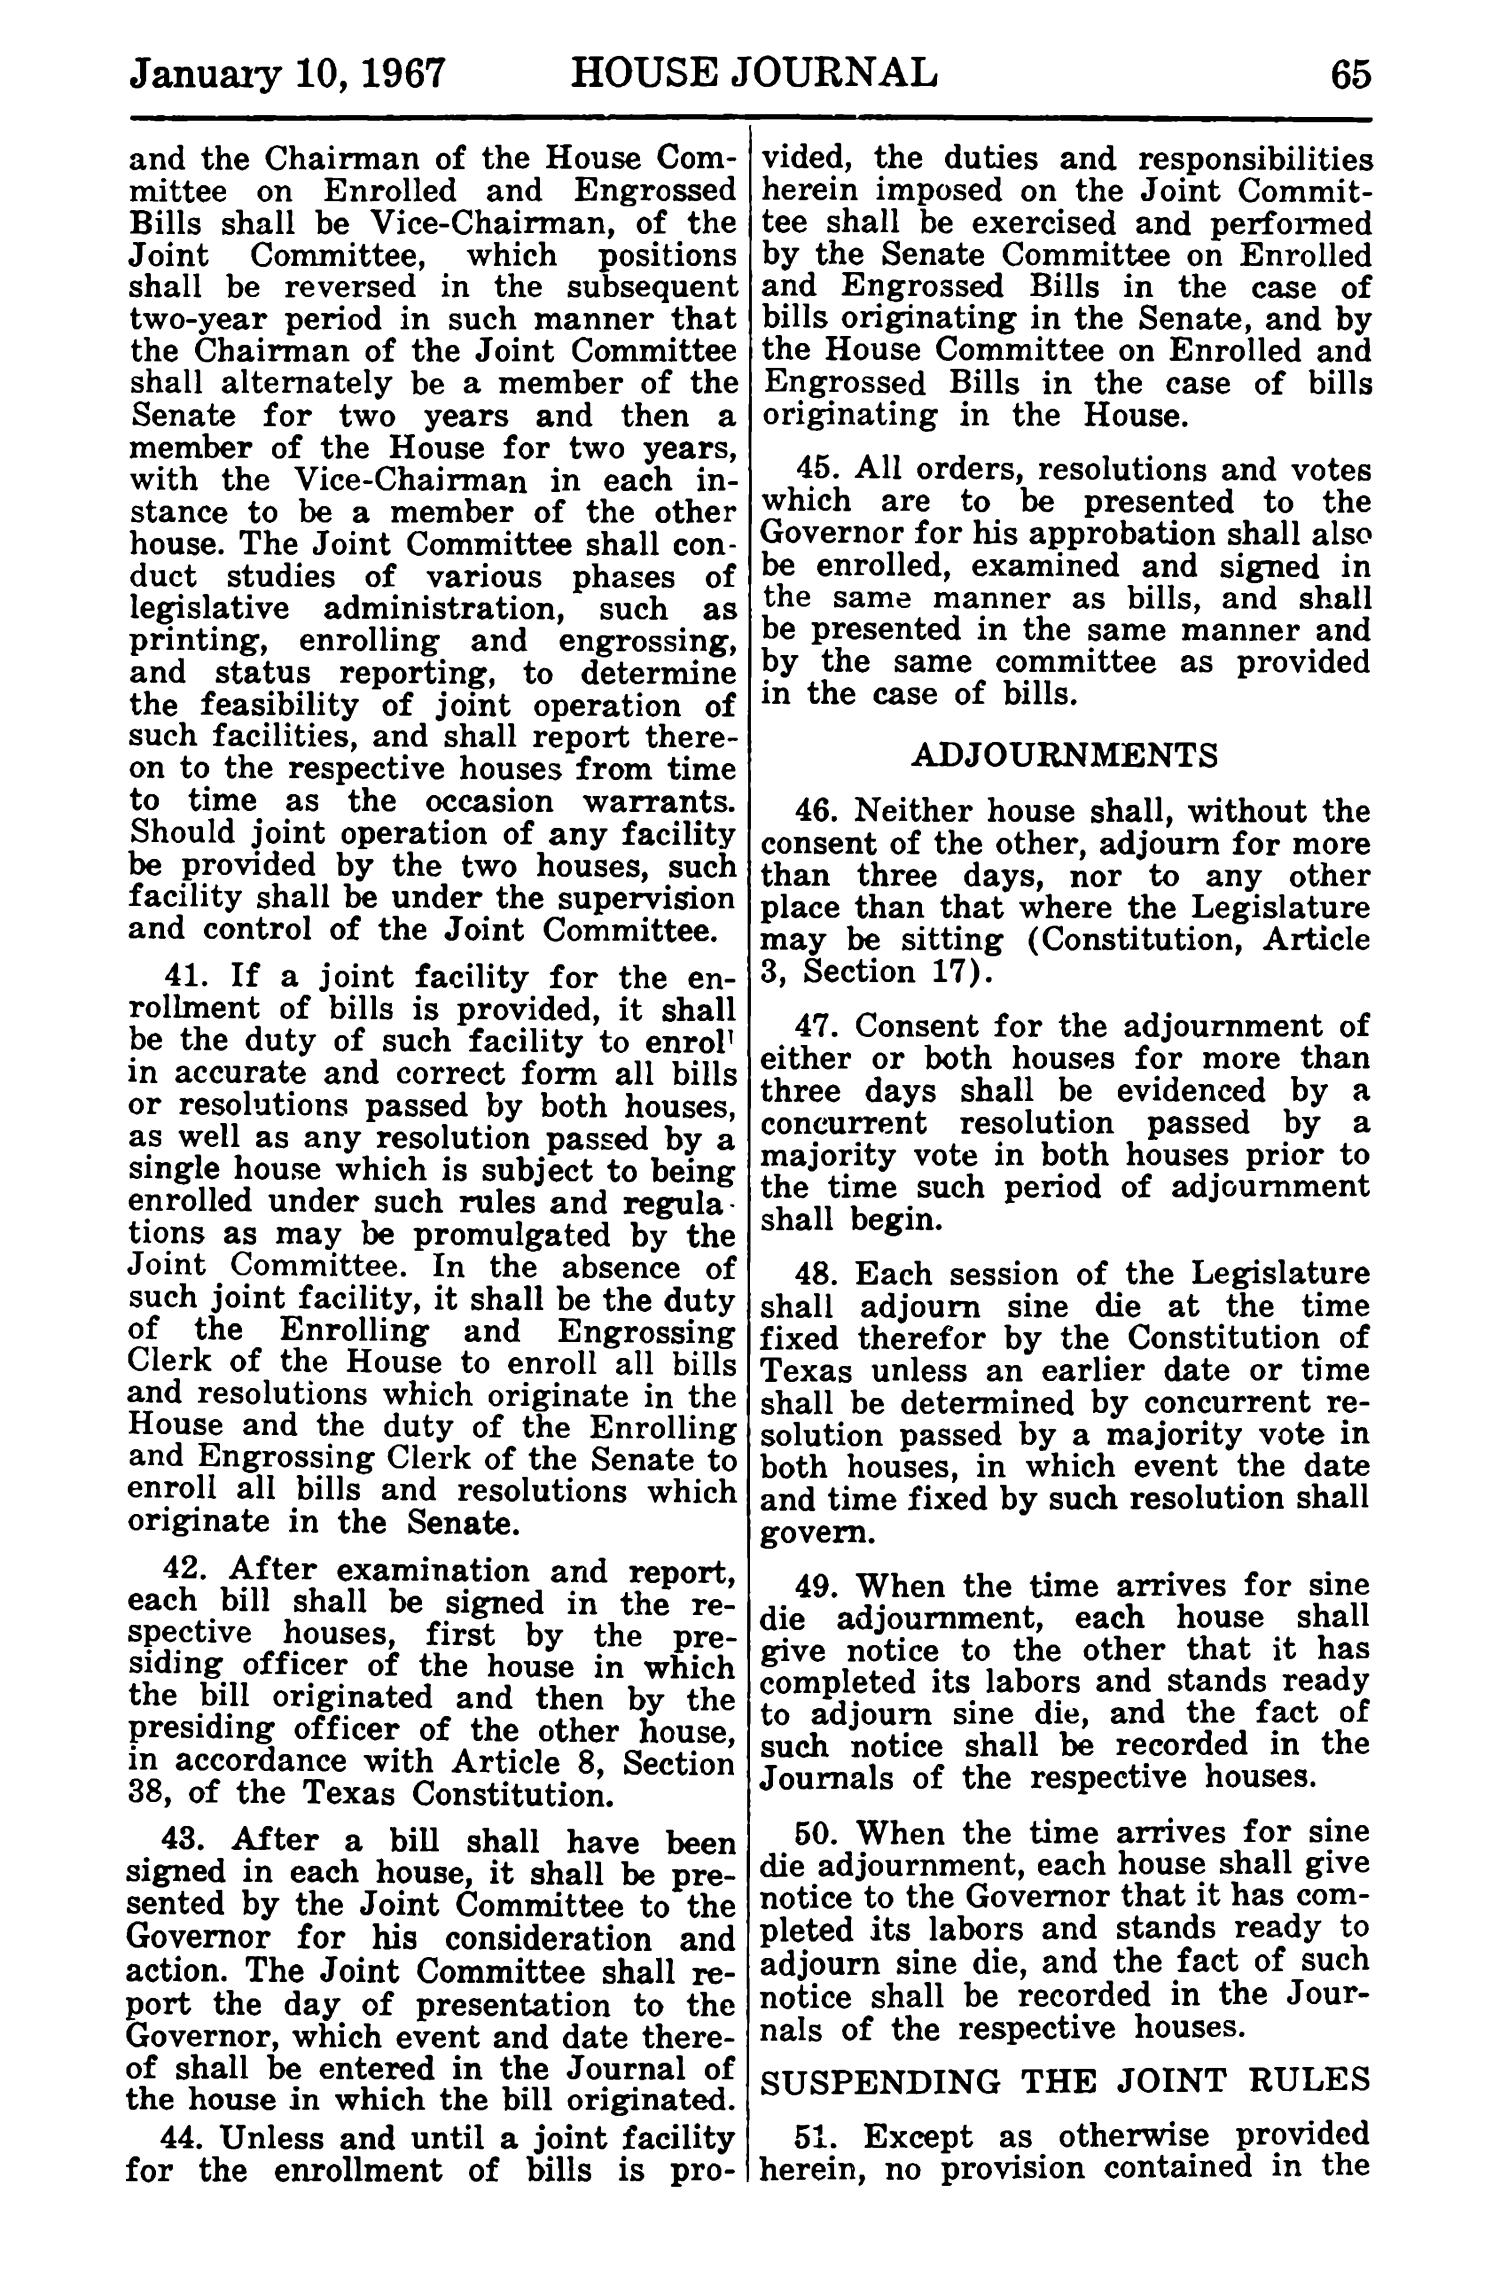 Journal of the House of Representatives of the Regular Session of the Sixtieth Legislature of the State of Texas, Volume 1
                                                
                                                    65
                                                